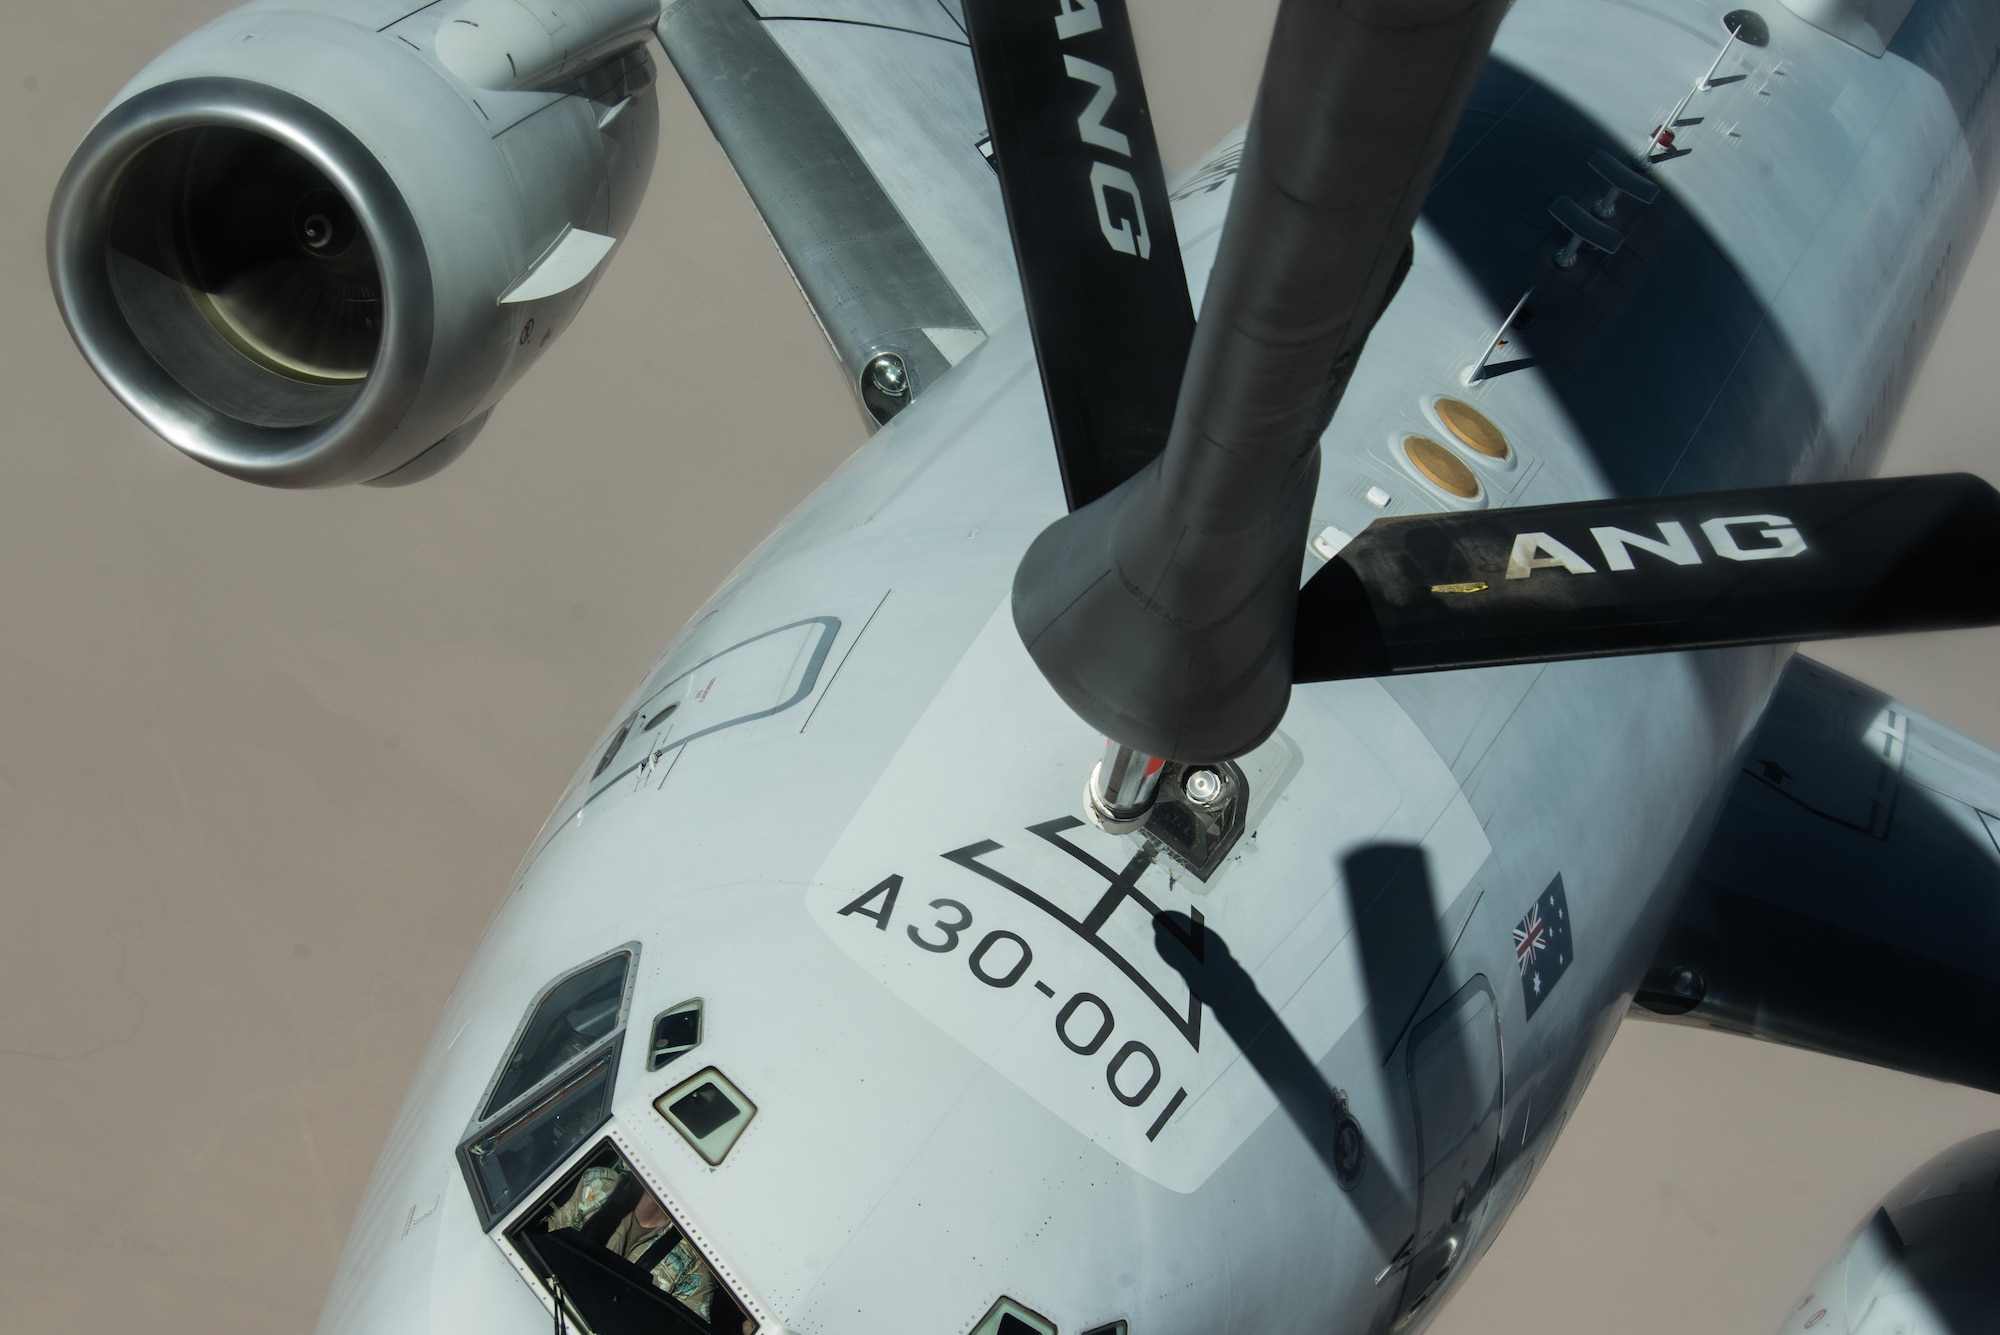 A Royal Australian Air Force E-7A Wedgetail receives fuels from an Air National Guard KC-135 Stratotanker that is deployed to the 340th Expeditionary Air Refueling Squadron at Al Udeid Air Base, Qatar over Iraq September 16, 2015. (U.S. Air Force photo/Staff Sgt. Alexandre Montes)  